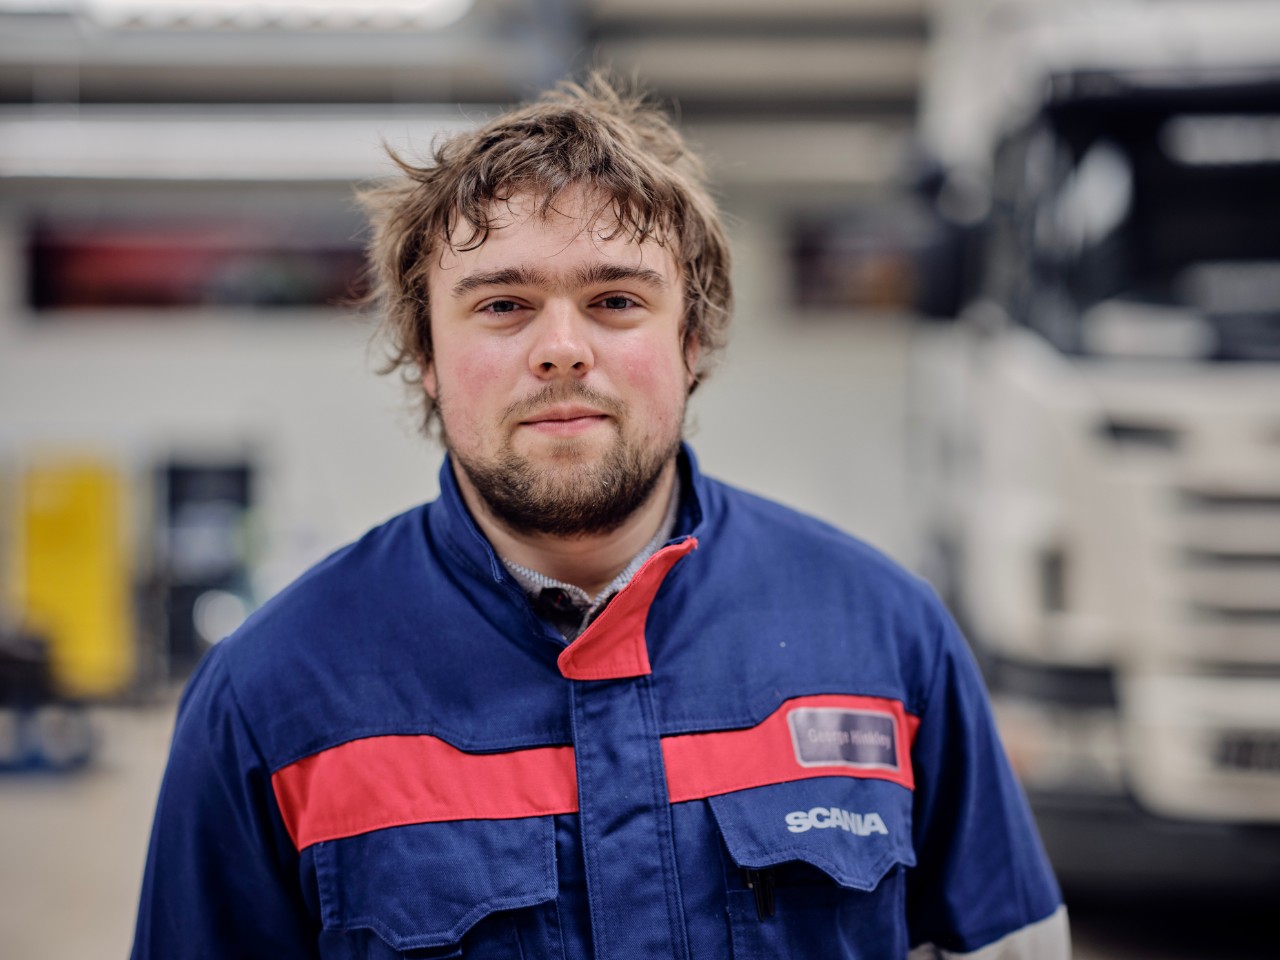 Apprentice of the Year George Hinkley explains how he’s turned what could be viewed as a disadvantage into an advantage